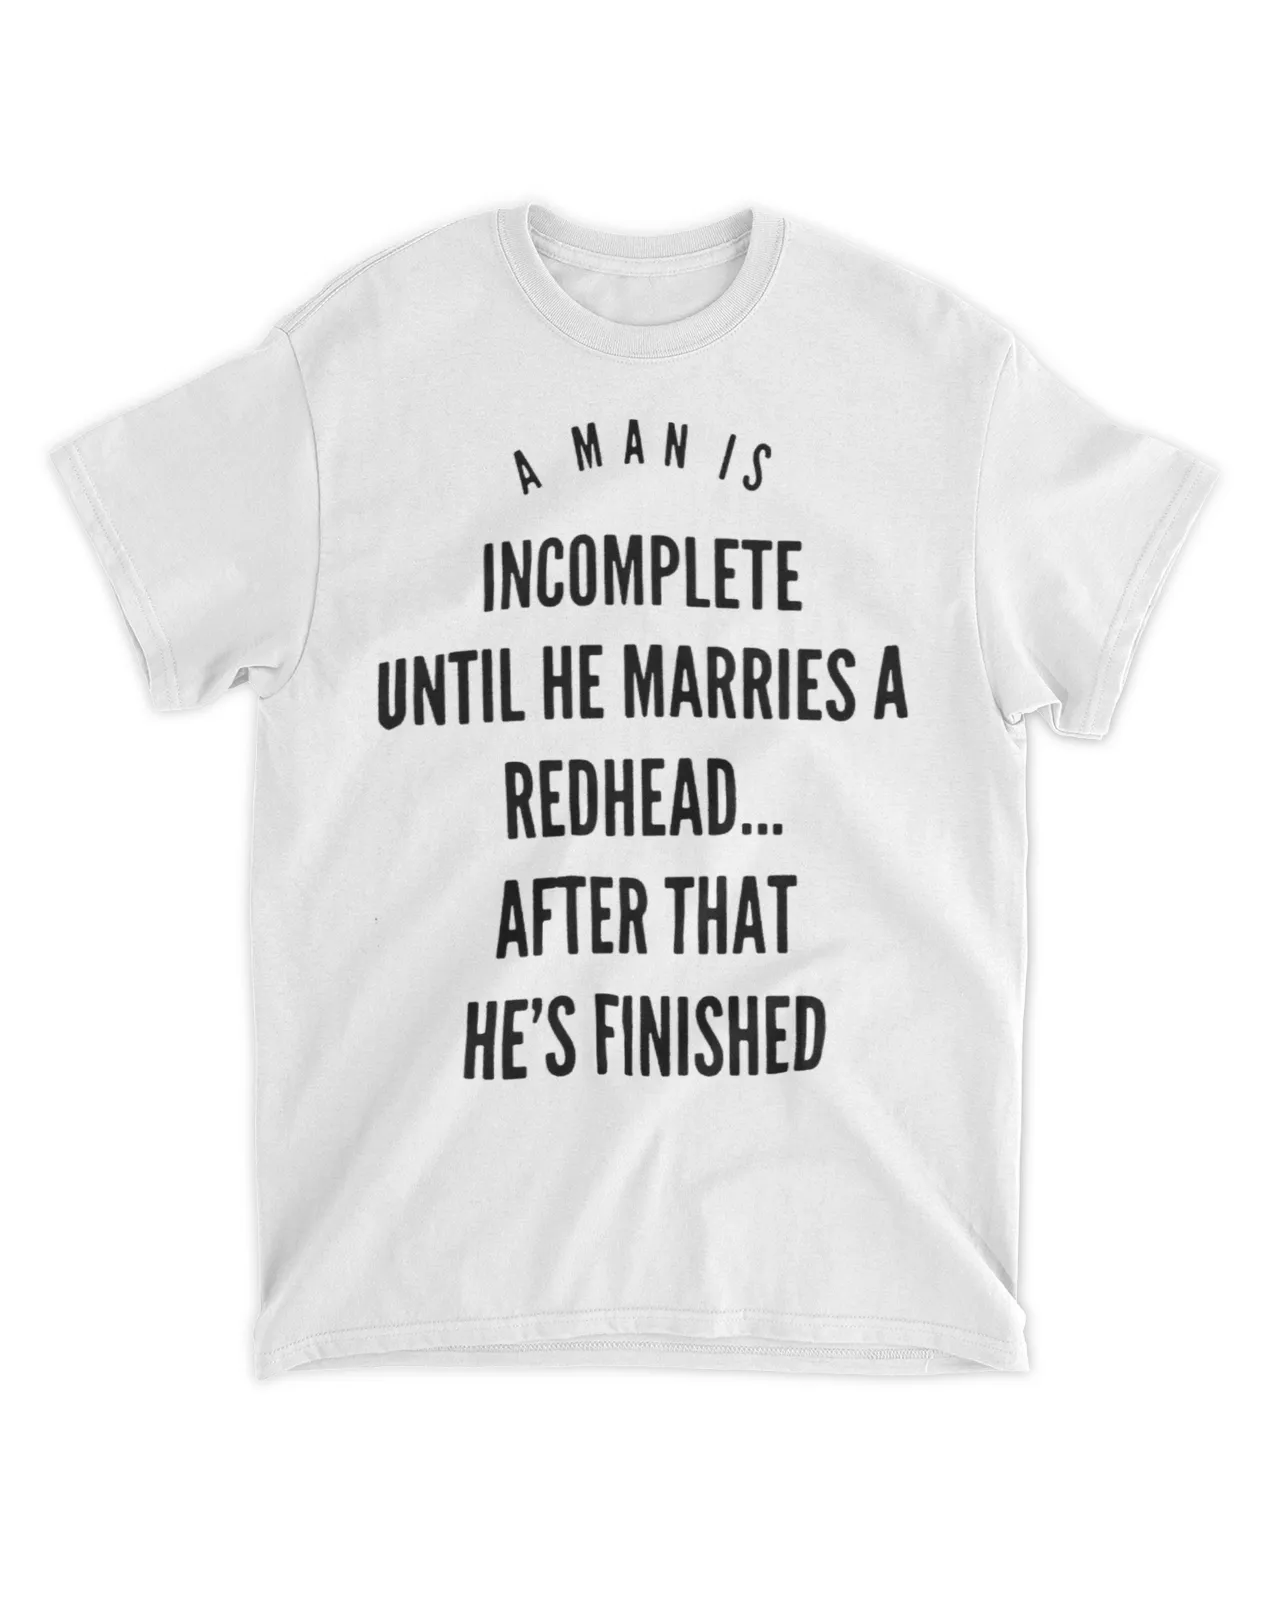  A man is incomplete until he's marries a redhead after that he's finished shirt